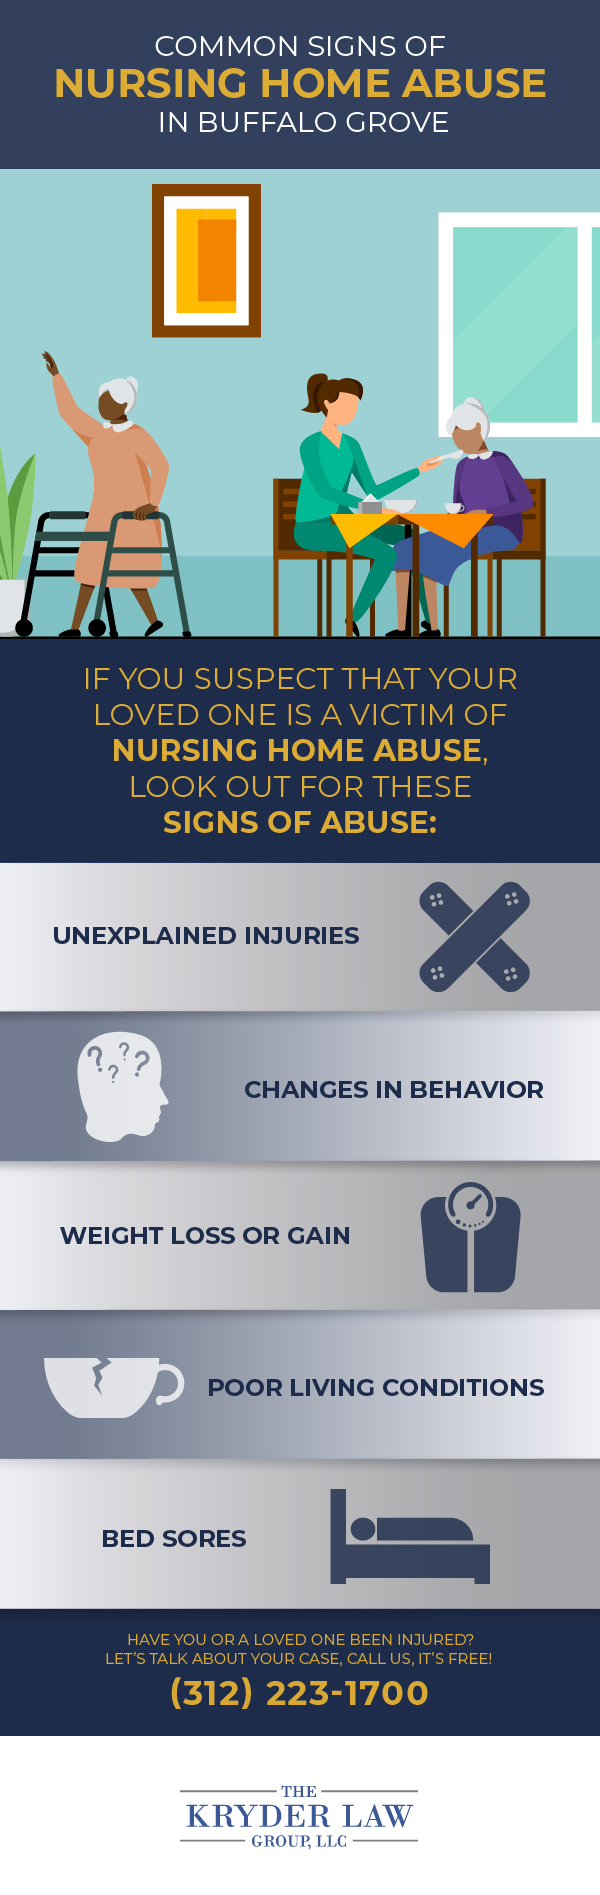 The Benefits of Hiring a Buffalo Grove Nursing Home Abuse Lawyer Infographic